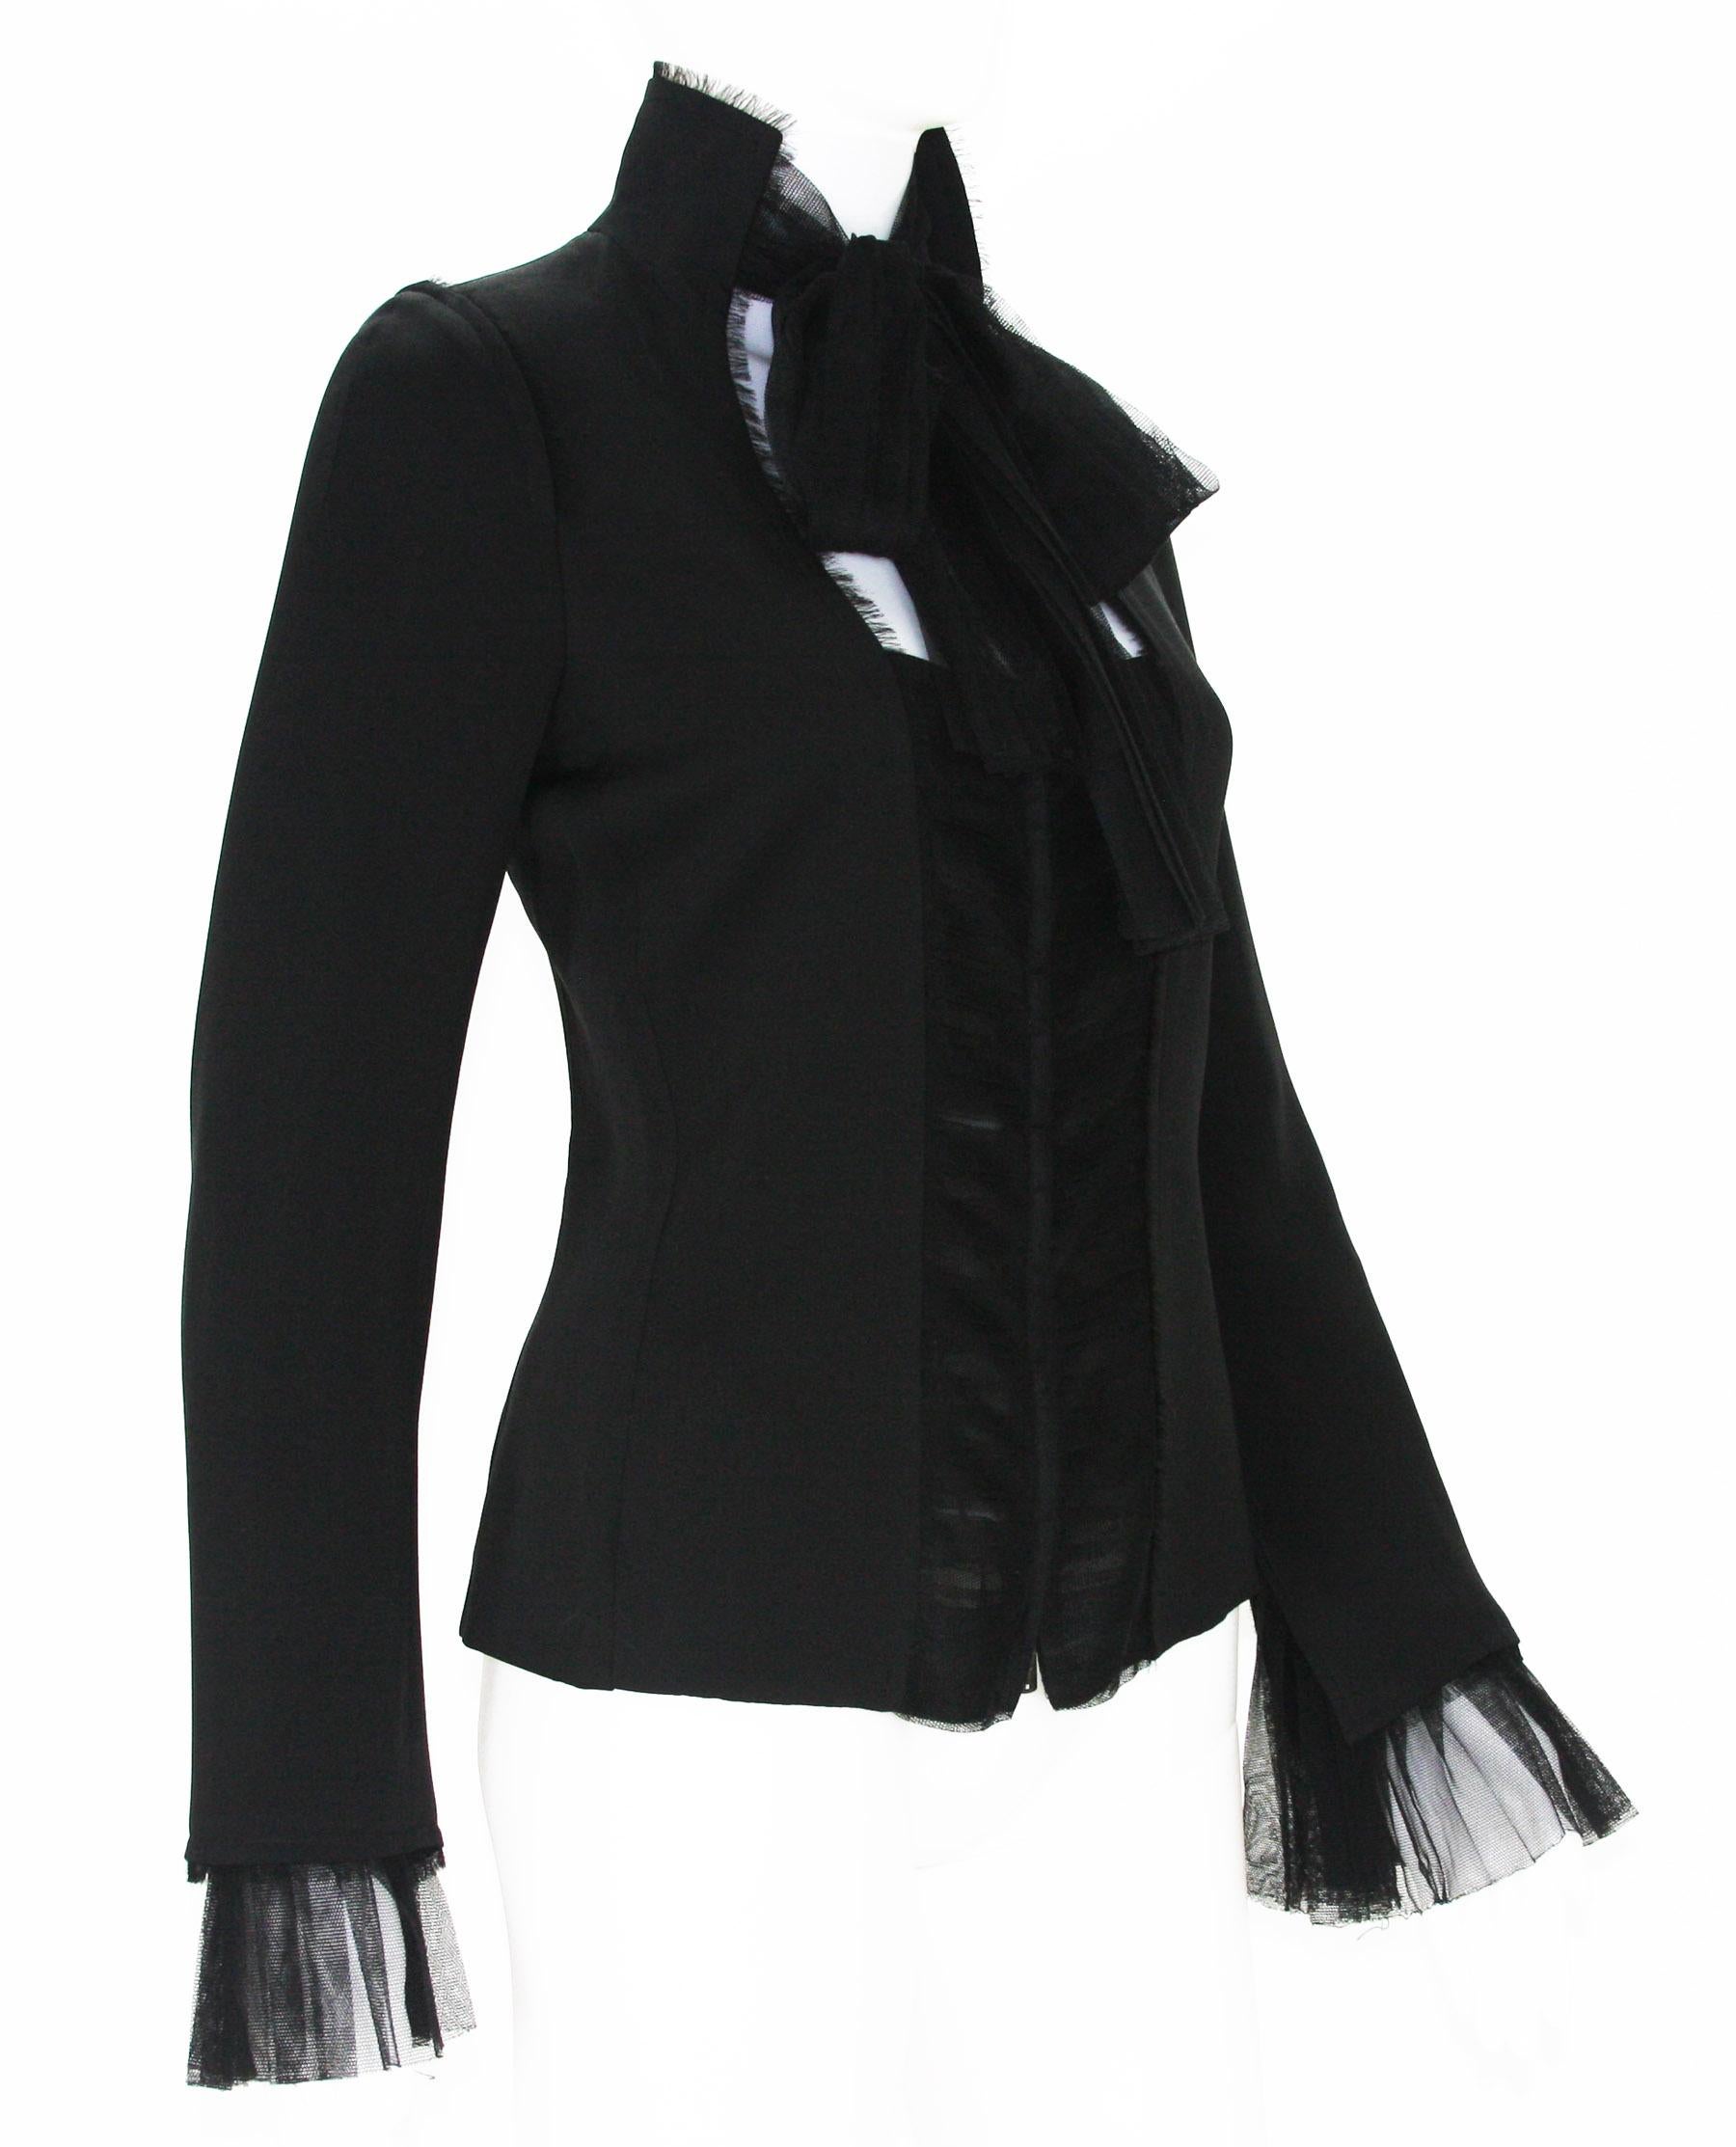 Tom Ford for Yves Saint Laurent Black Silk Plisse Tulle Jacket Blazer
F/W 2002 Collection
Designer size - Fr. 36 ( US 4 )
Classy and Romantic - Very French!!!
100% Silk, Plisse Tulle Inserts on the Front and Sleeves, Front Zip Closure, Slit in Back